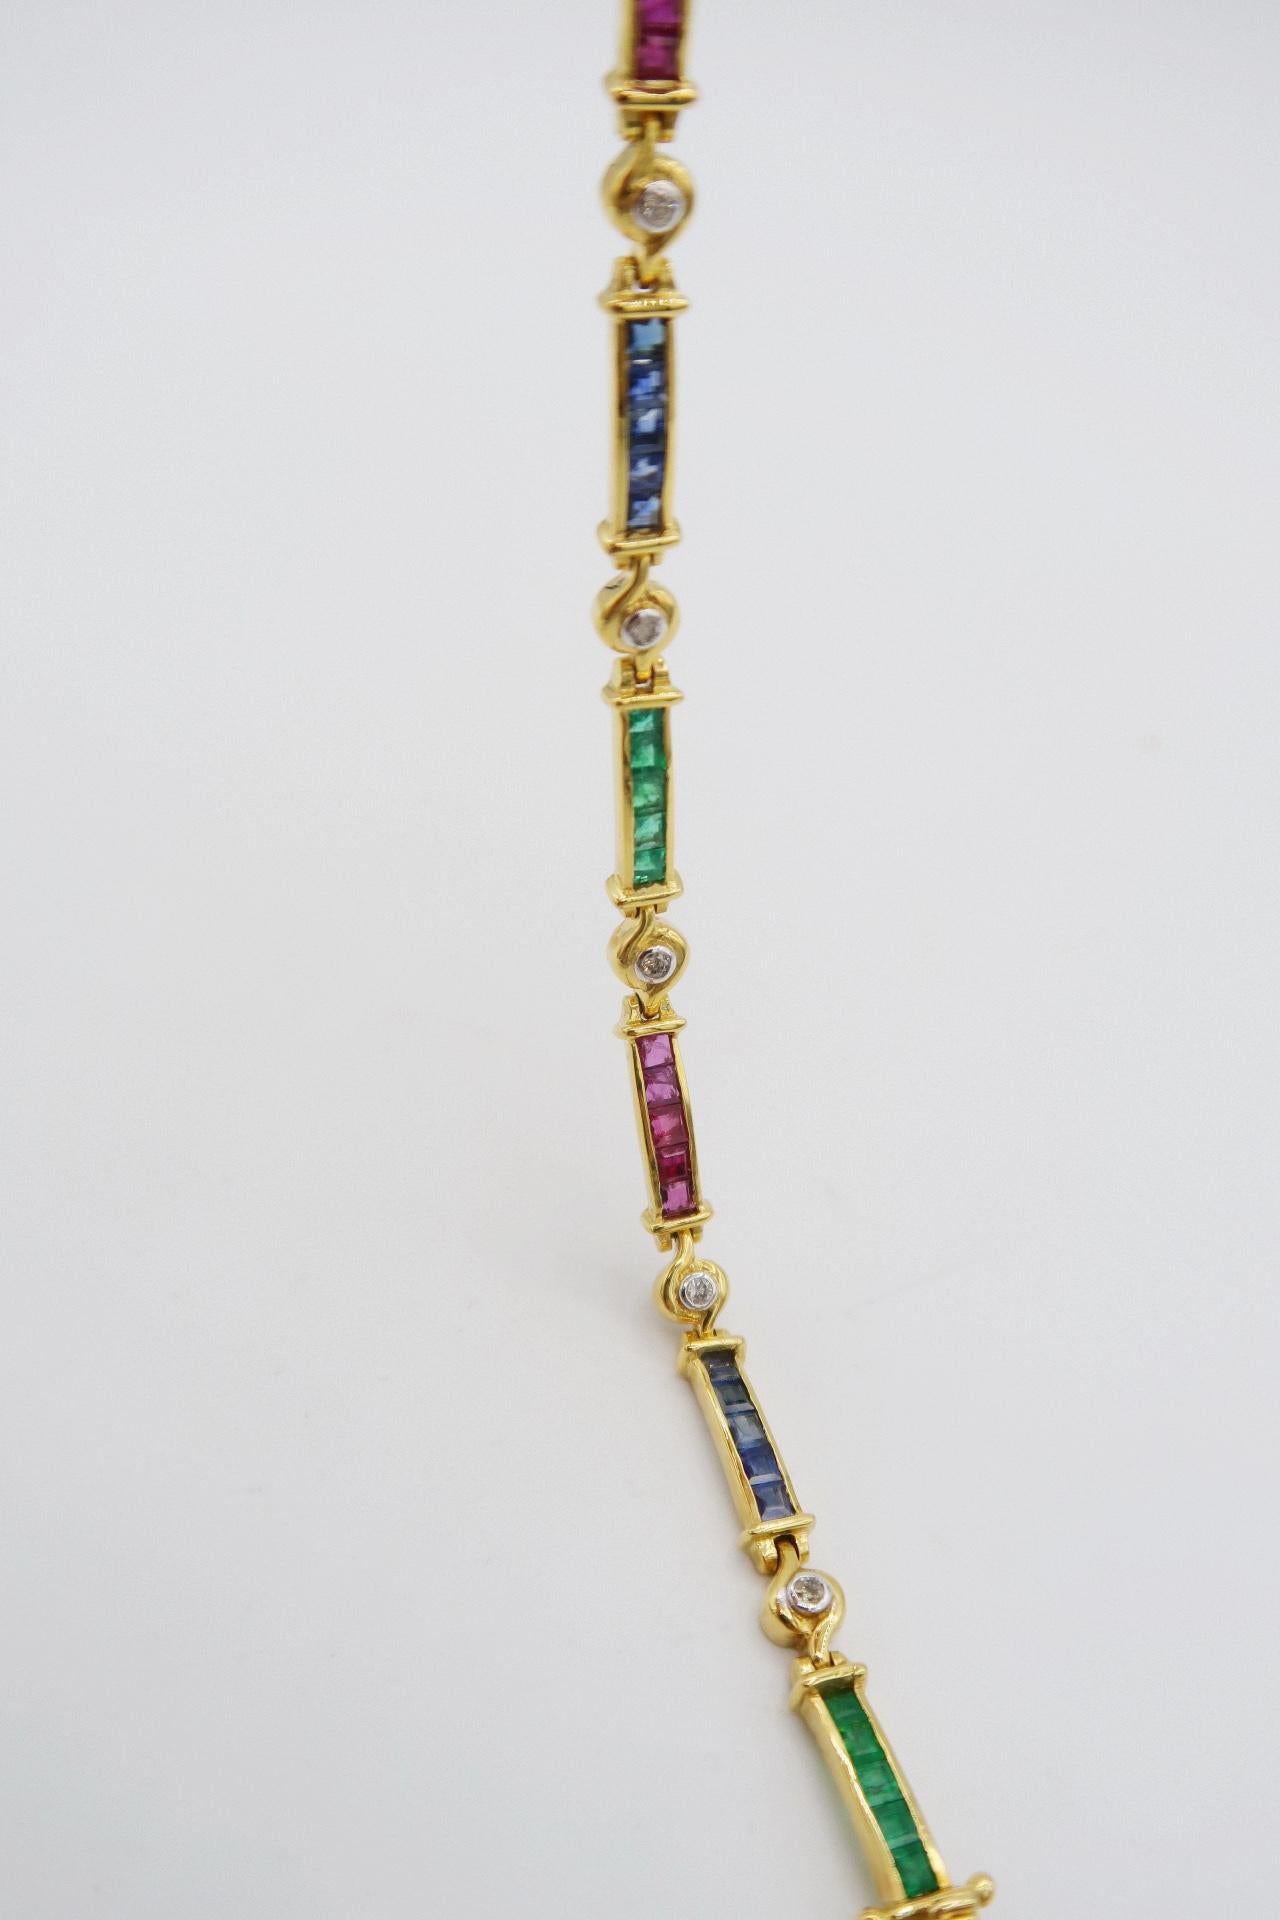 Vivid Emerald Ruby Blue Sapphire Link Bracelet with Diamonds in 18K Yellow Gold

Gold: 18K Yellow Gold, 13.49 g
Emerald: 1.62 ct
Sapphire: 2.30 ct
Ruby: 2.38 ct
Diamond: 0.20 ct

Length: 7 inches